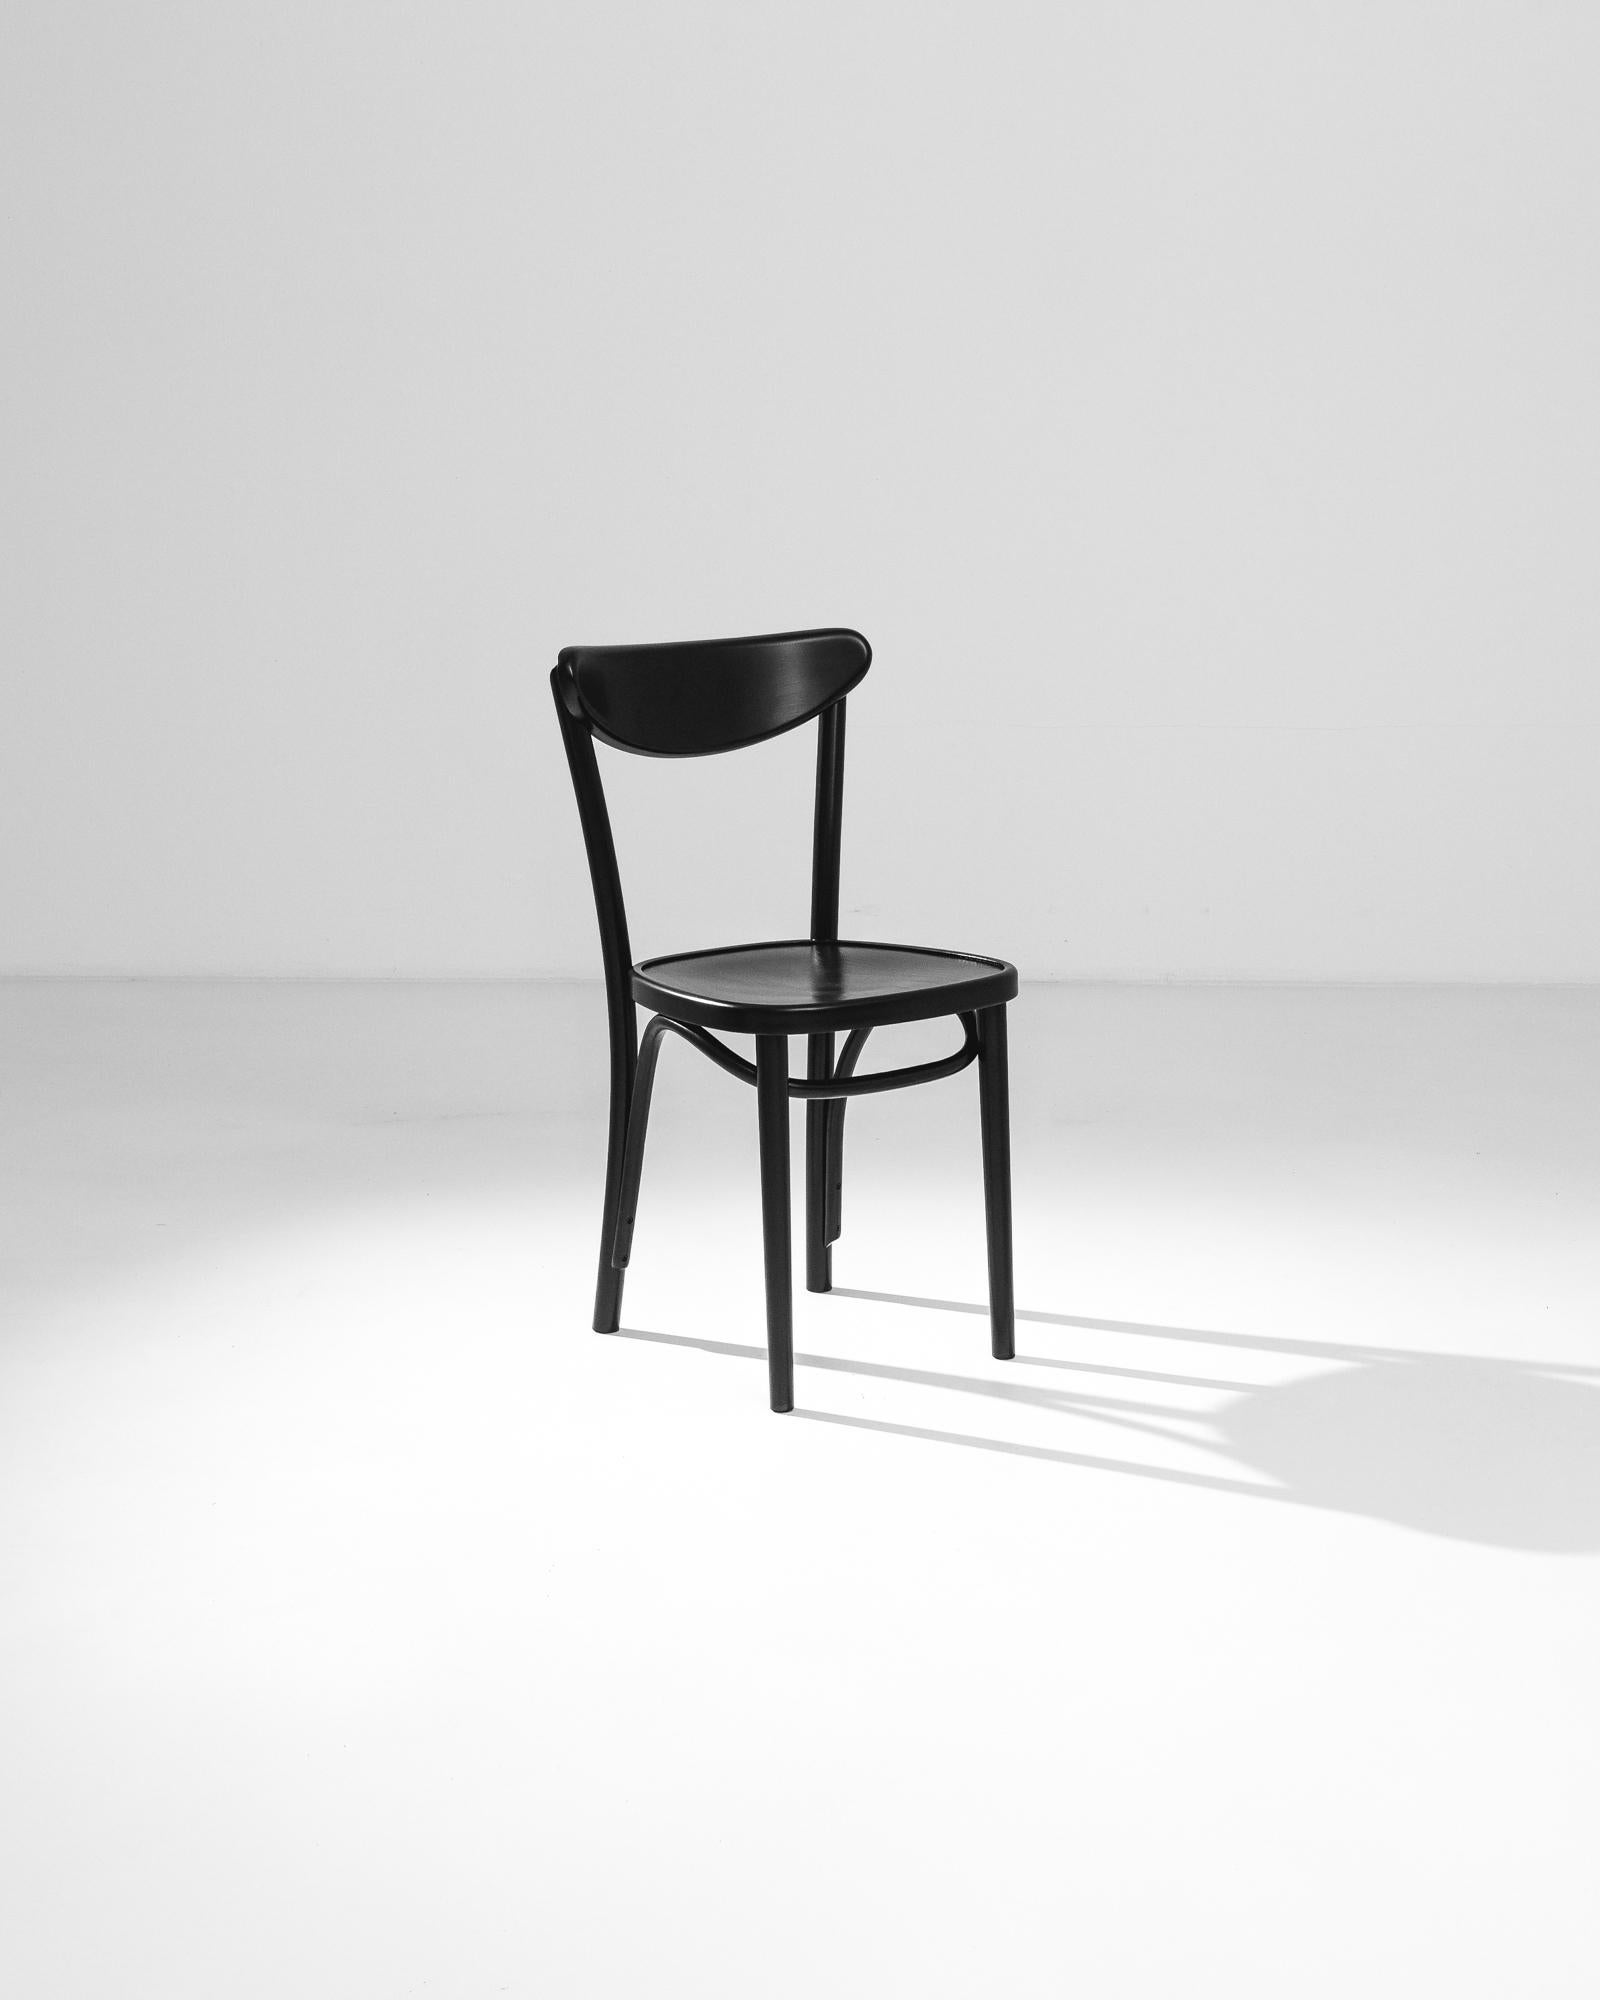 A wooden chair from Poland. The graceful lines of the bentwood legs recall the iconic designs of Thonet; a curved backrest and the gentle indentation of the seat create a sense of comfort and ease. The sleek, black-painted finish of the wood